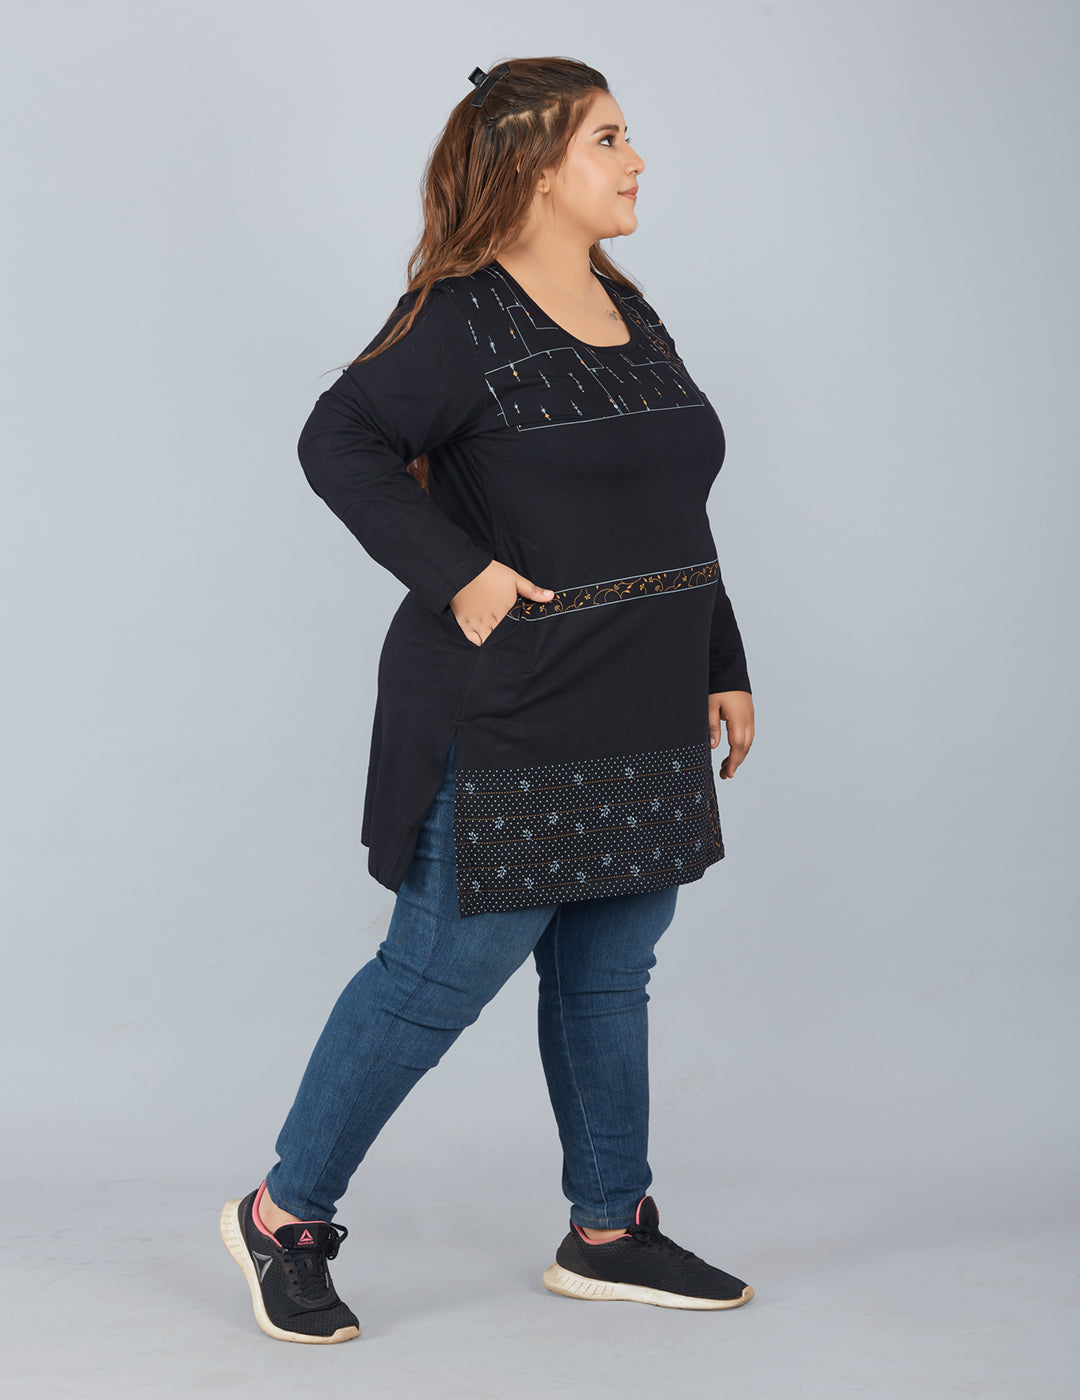 Cotton Long Top For Women Plus Size In Full Sleeve - Black At Best Prices